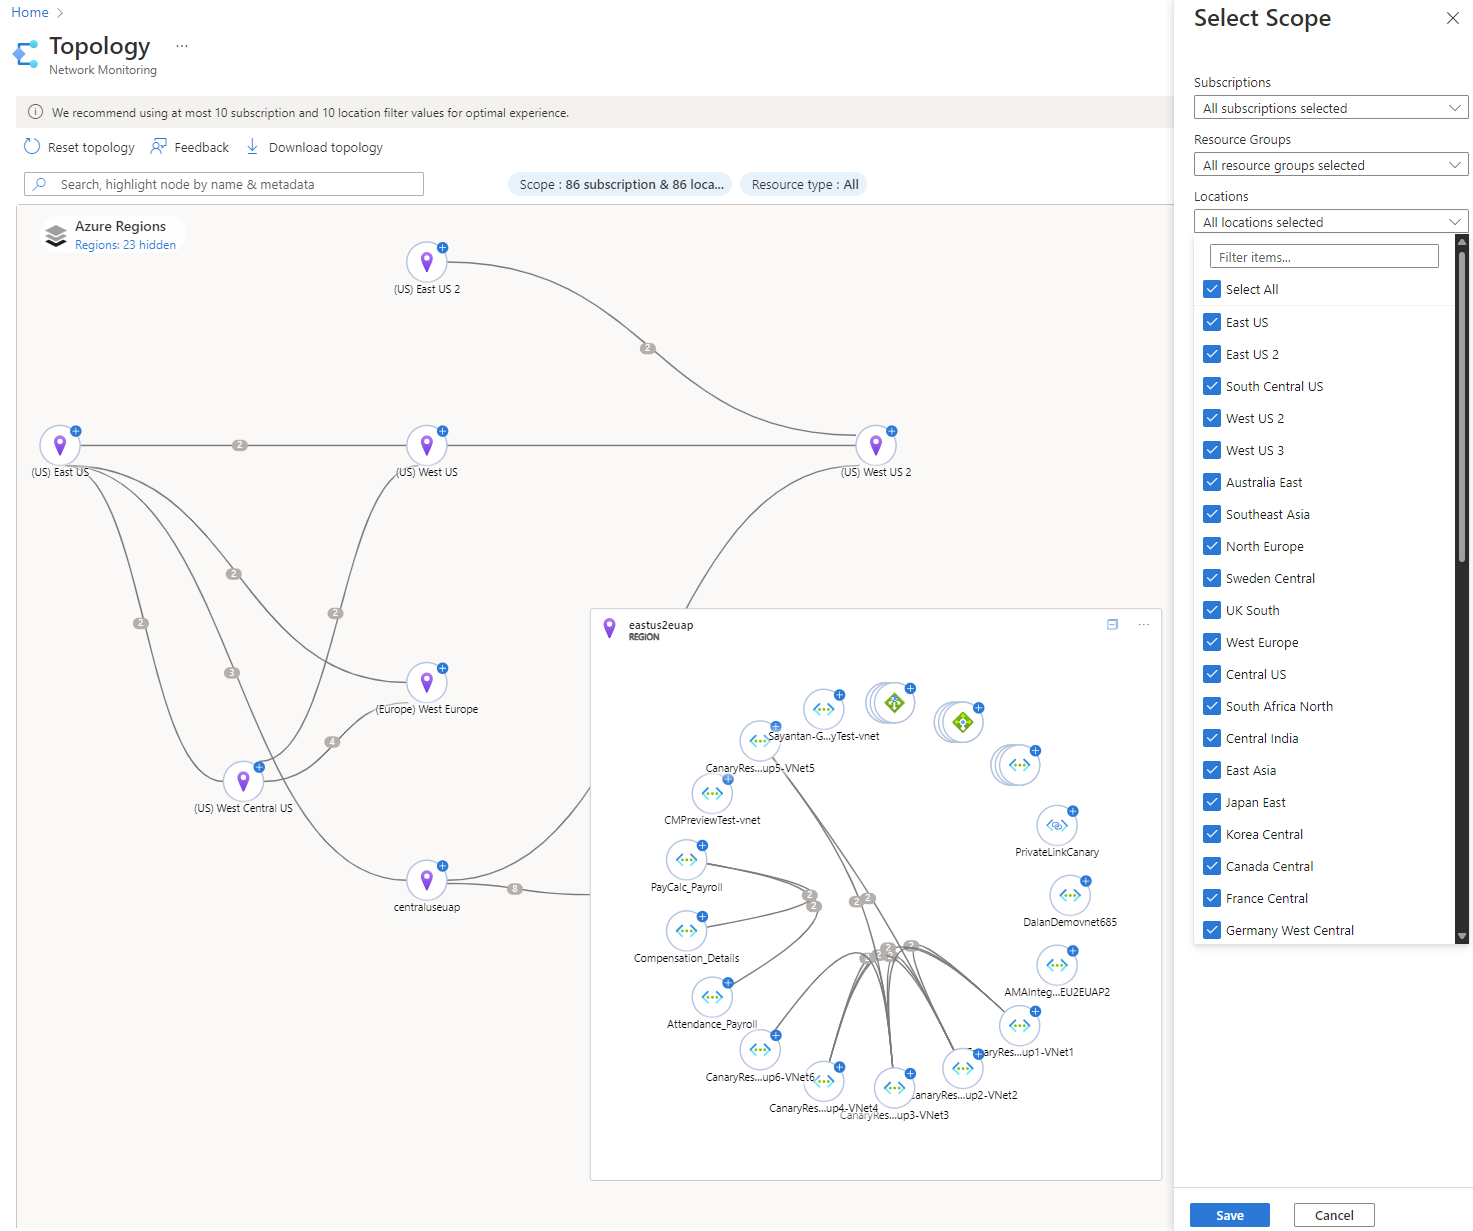 Screenshot displaying Azure Network's Topology view of a network and its configuration.